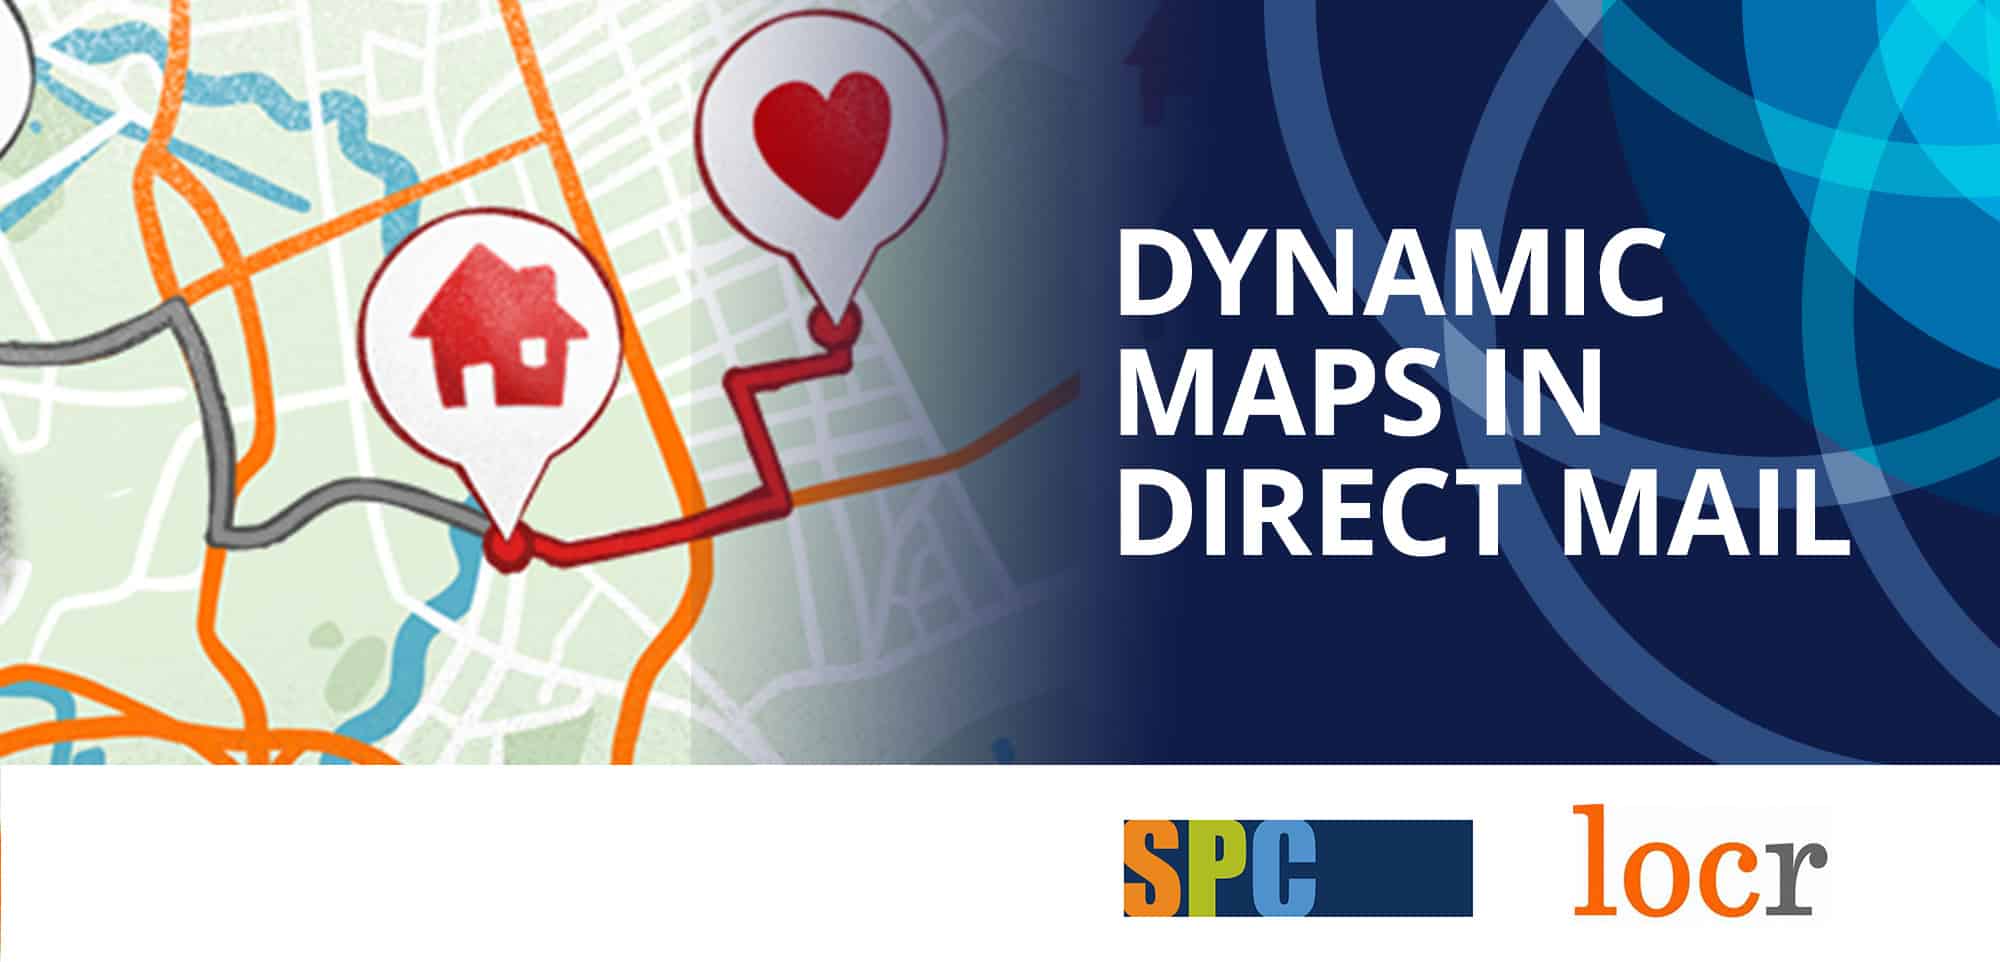 Take a Fresh Look at Adding Dynamic Maps in Direct Mail